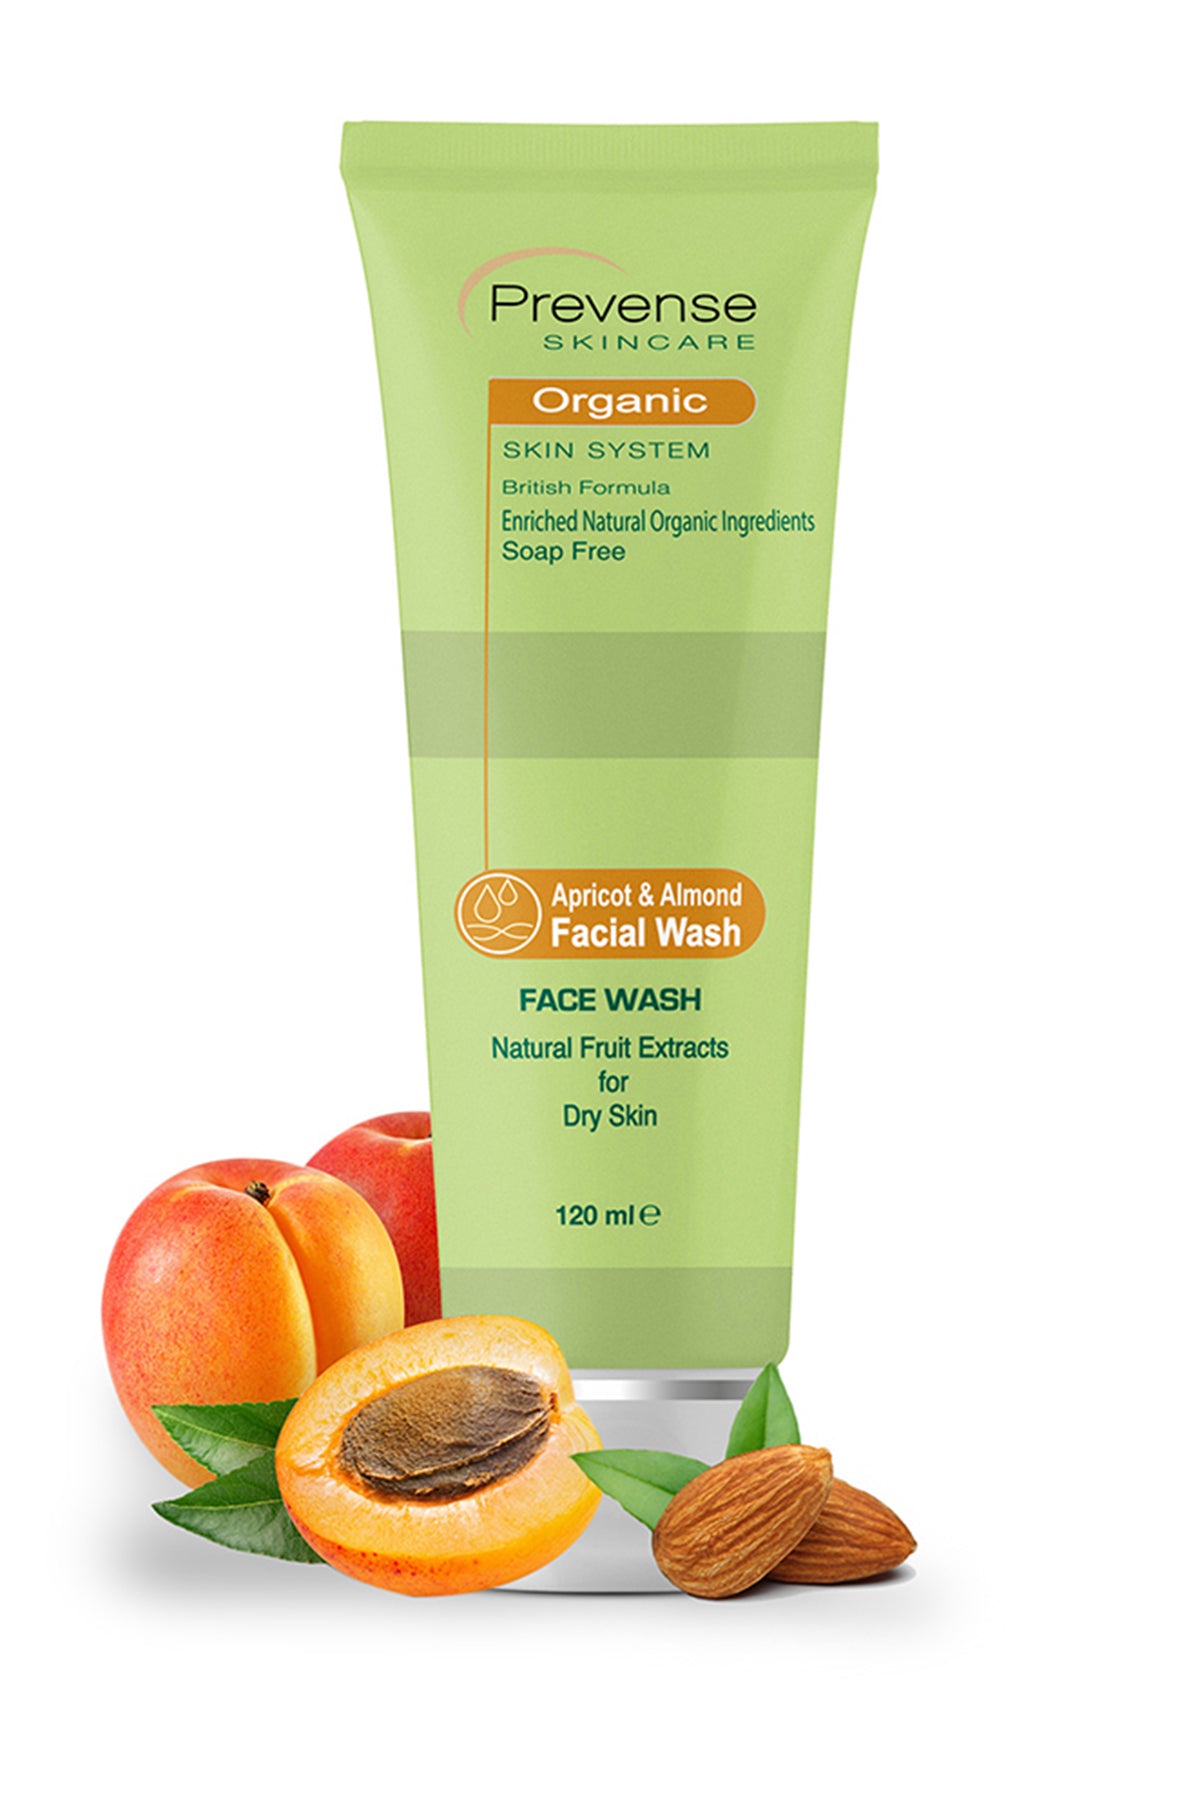 Prevense Apricot and Almond Face Wash for Dry Skin (120 ml)